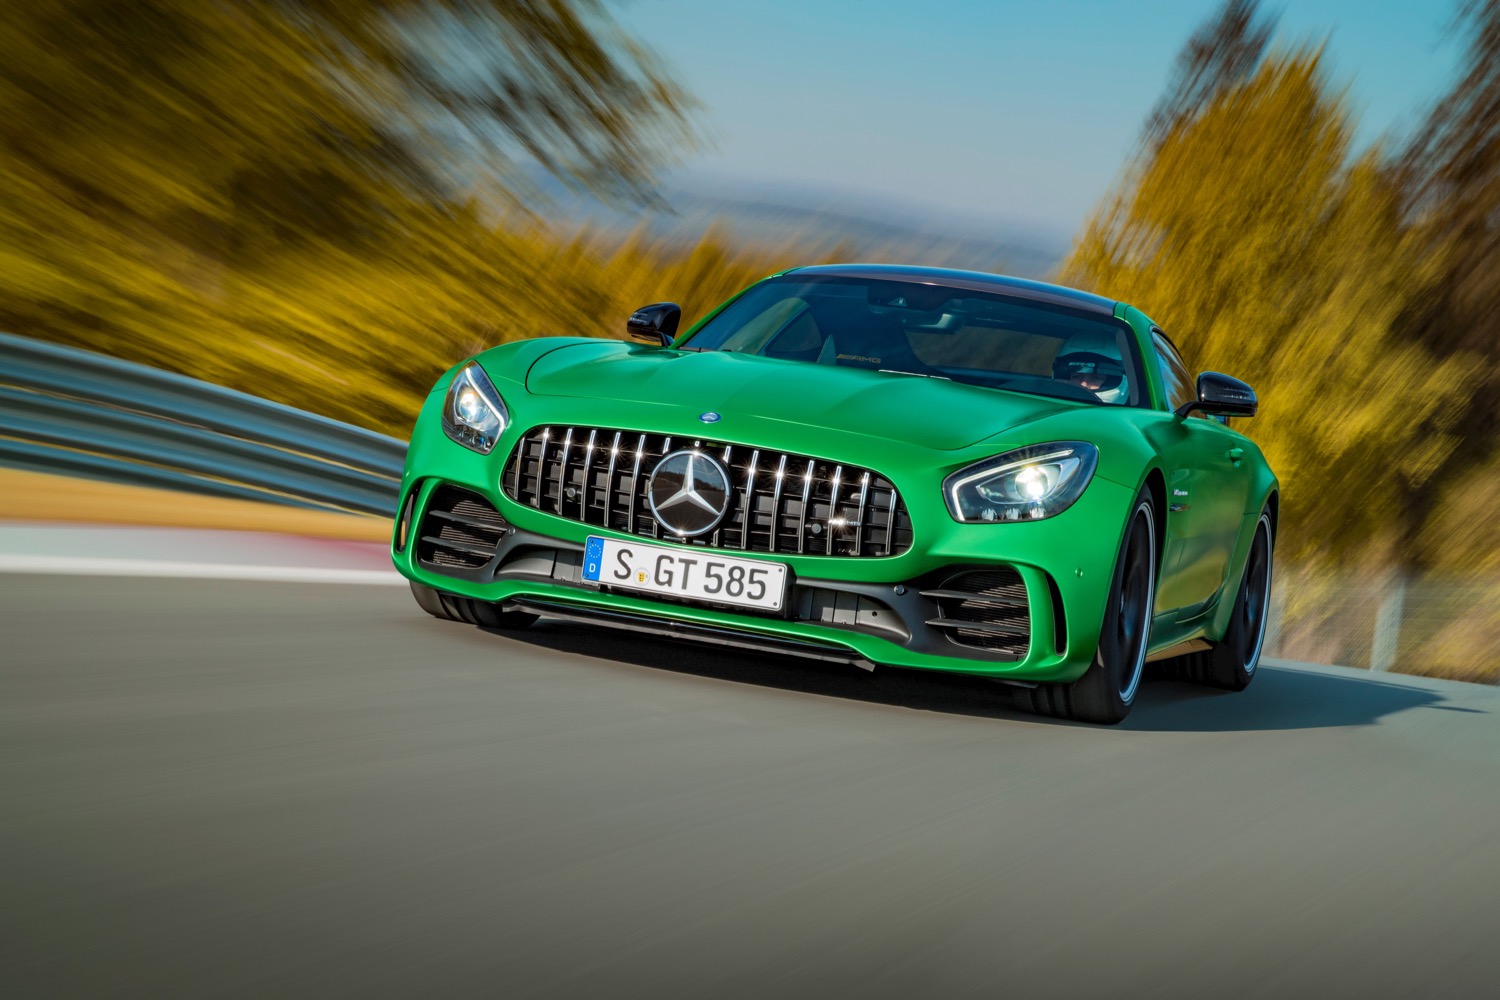 The Mercedes-AMG GT2 is AMG's most powerful ever customer race car